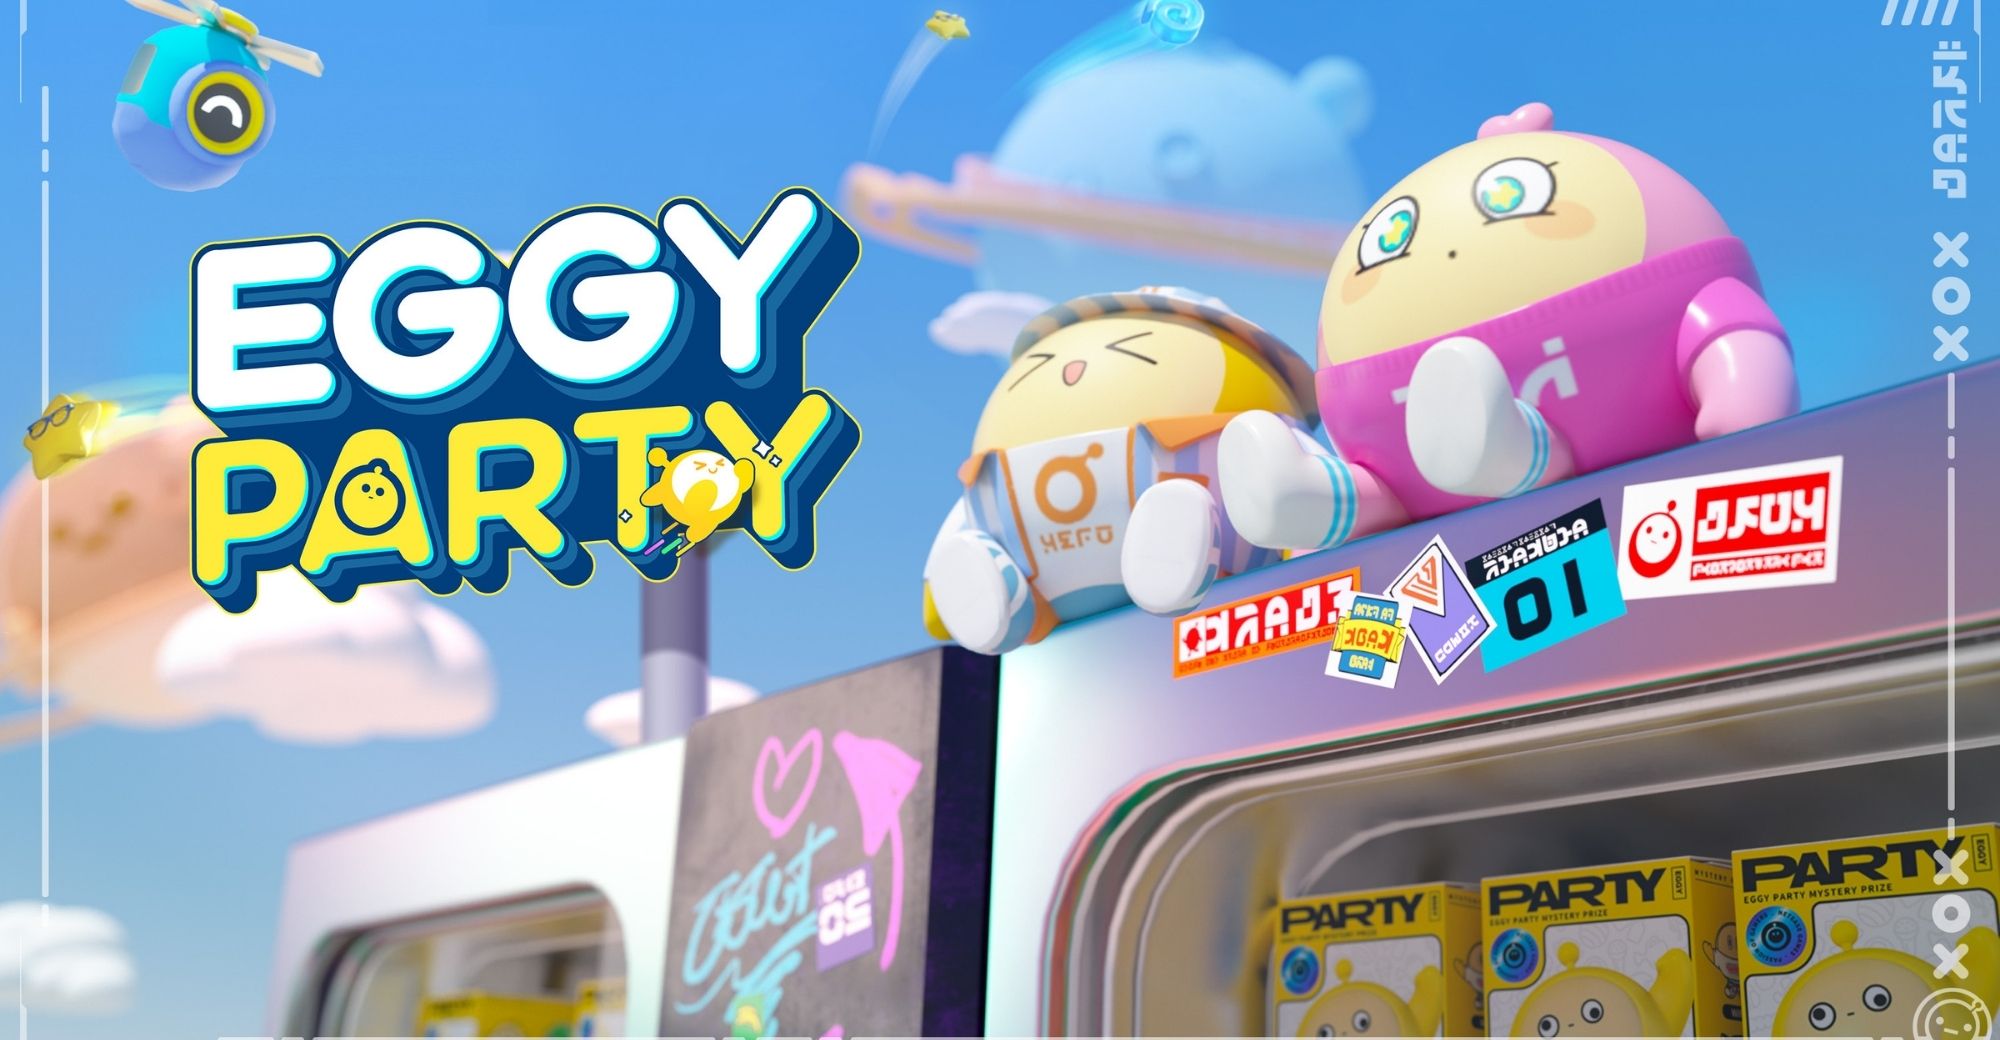 NetEase Sees Casual Party Mobile Game Eggy Party Become Popular Among Younger Generations